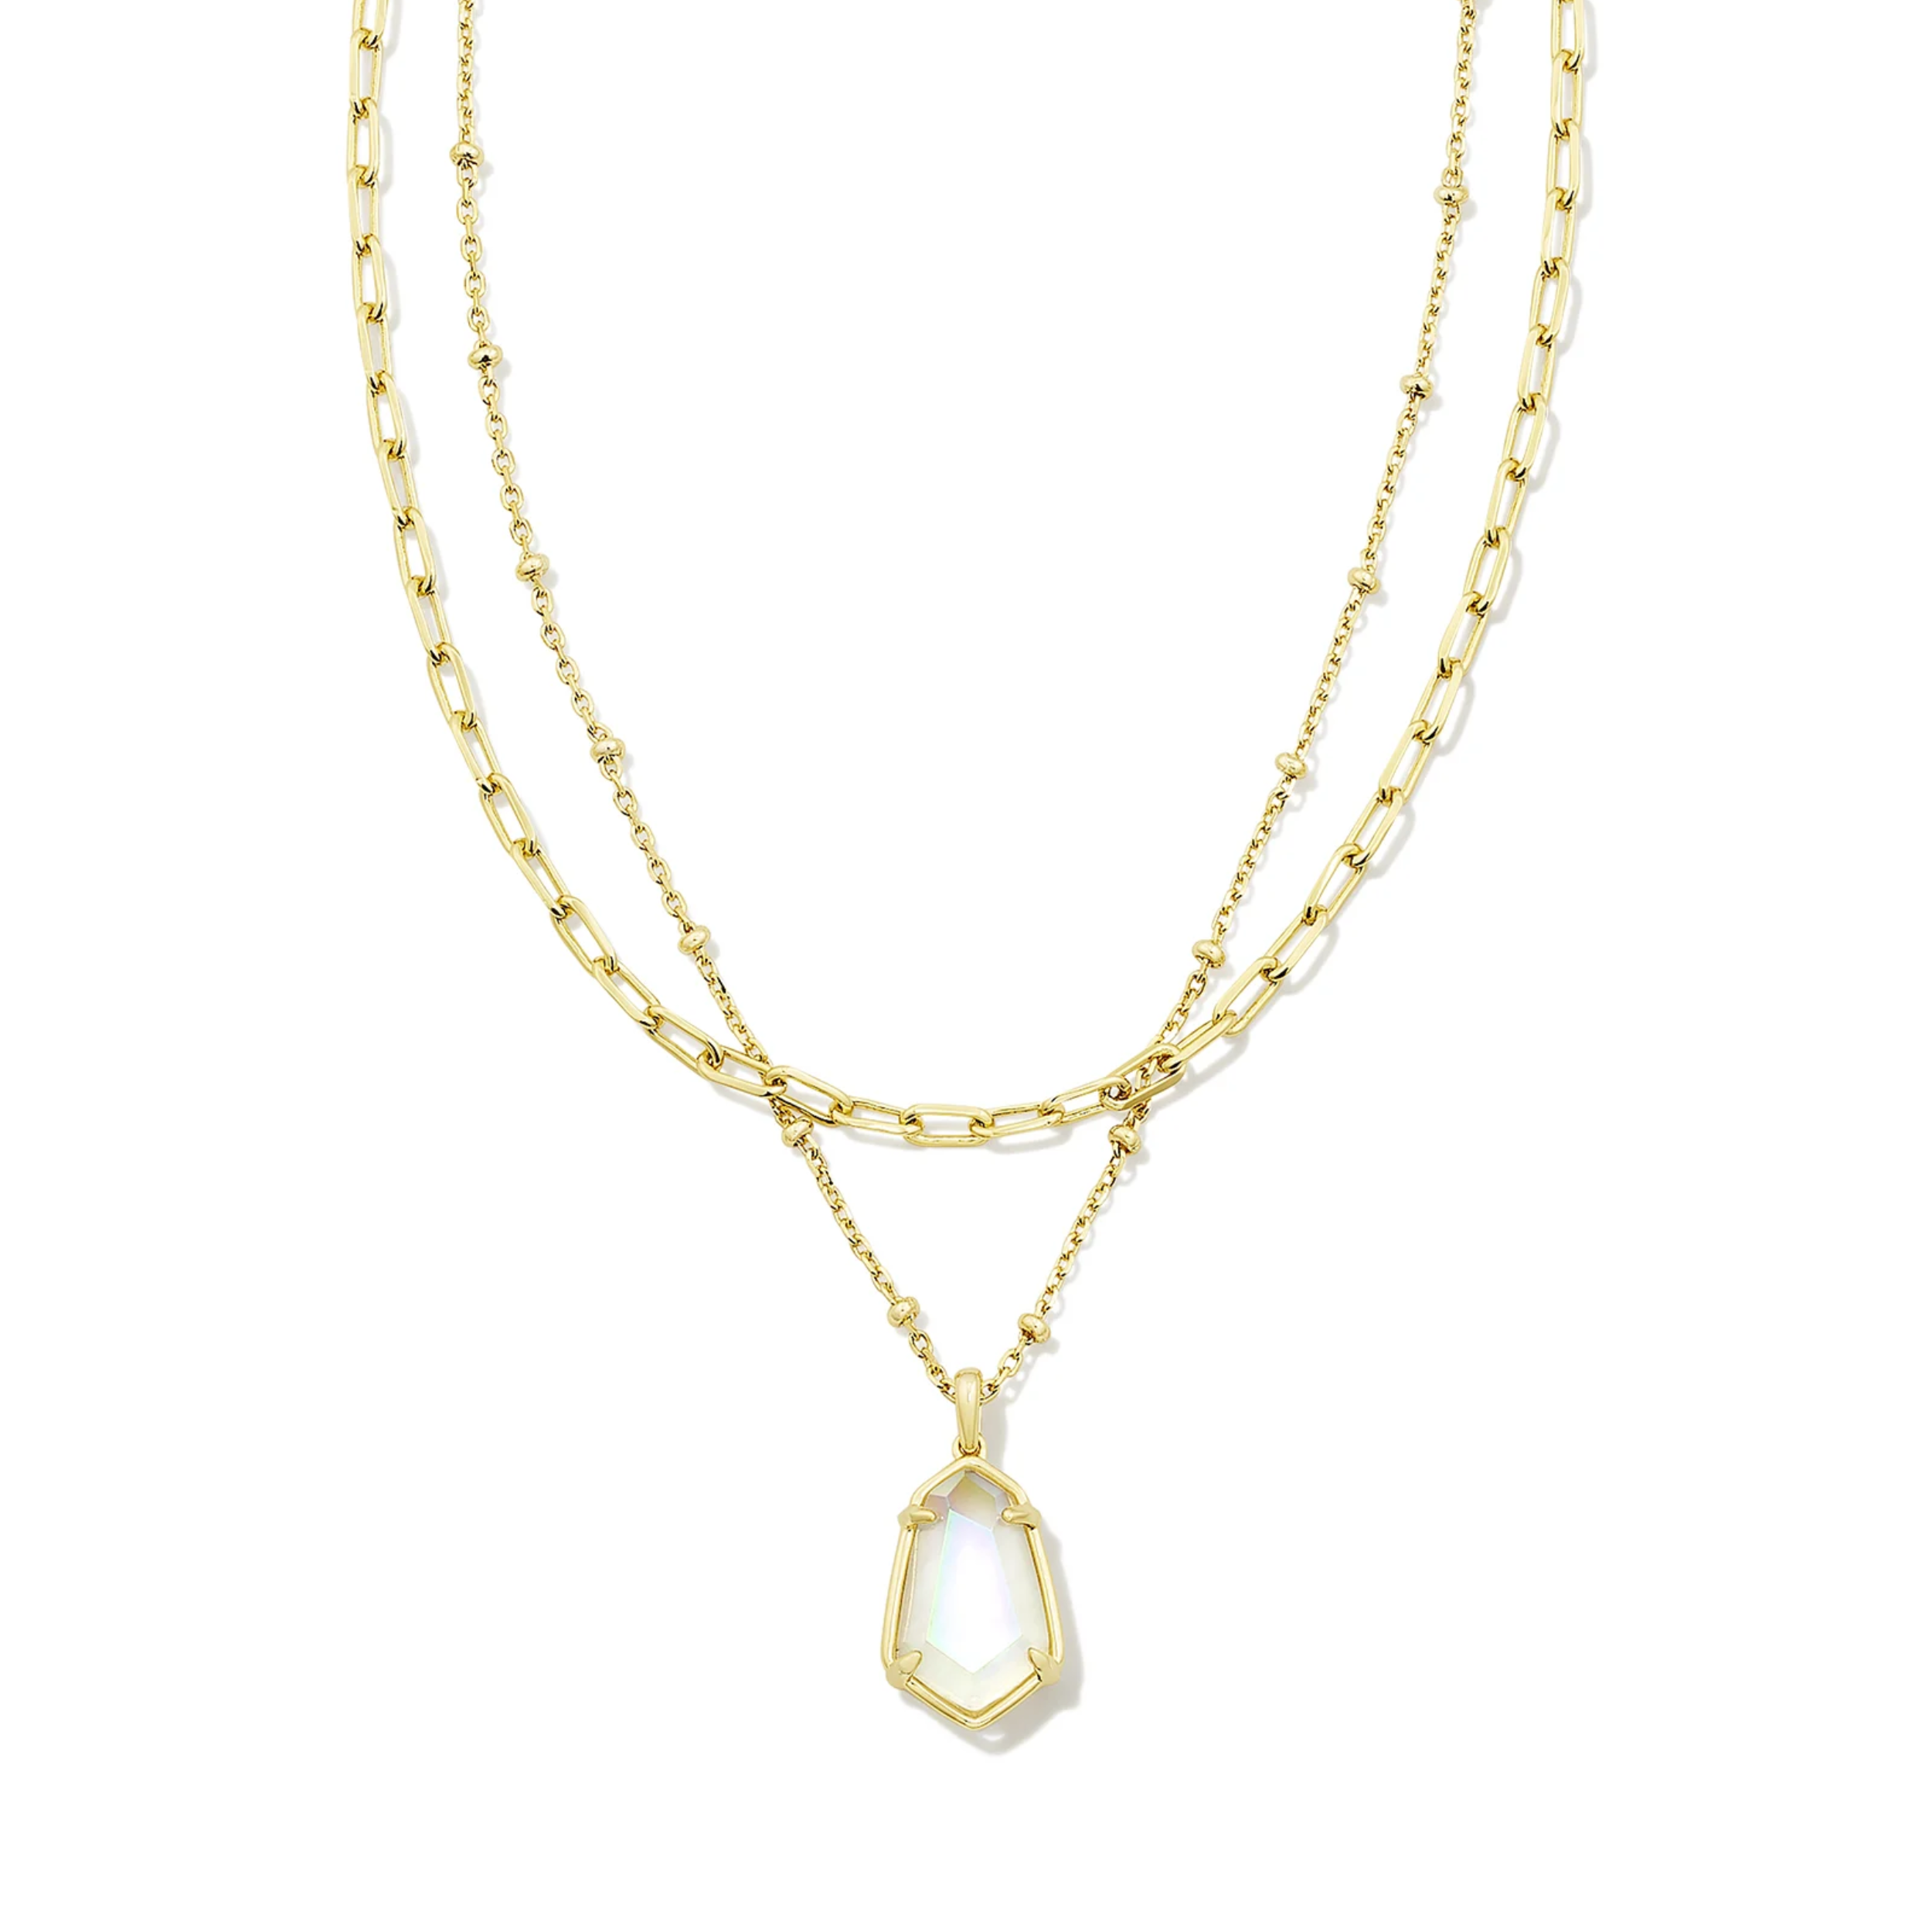 This Alexandria Gold Multi Strand Necklace in Iridescent Clear Rock Crystal is pictured on a white background.